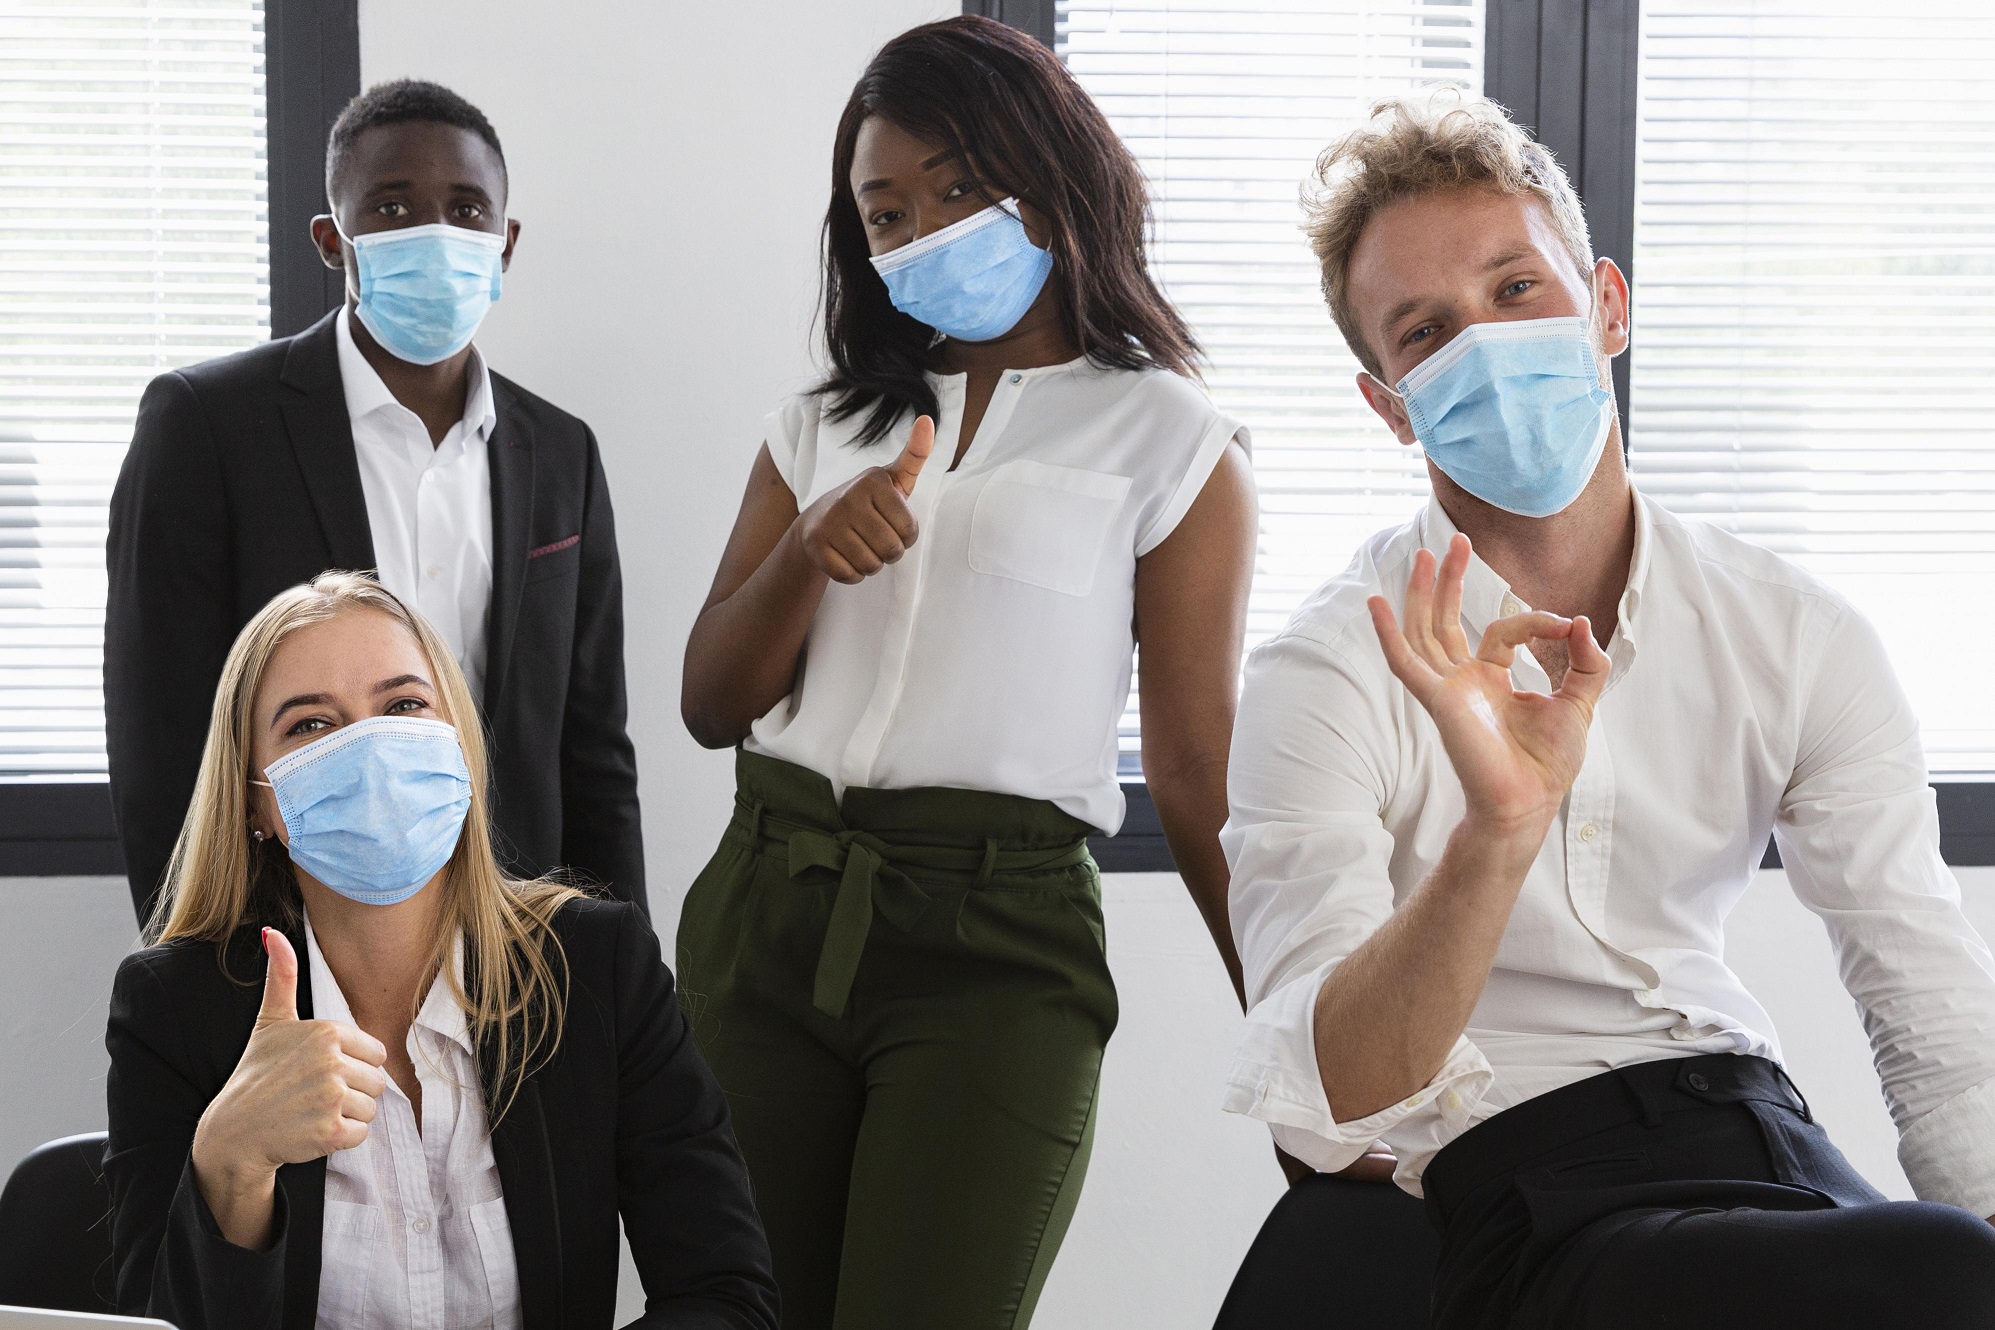 Employees wearing mask during Covid19